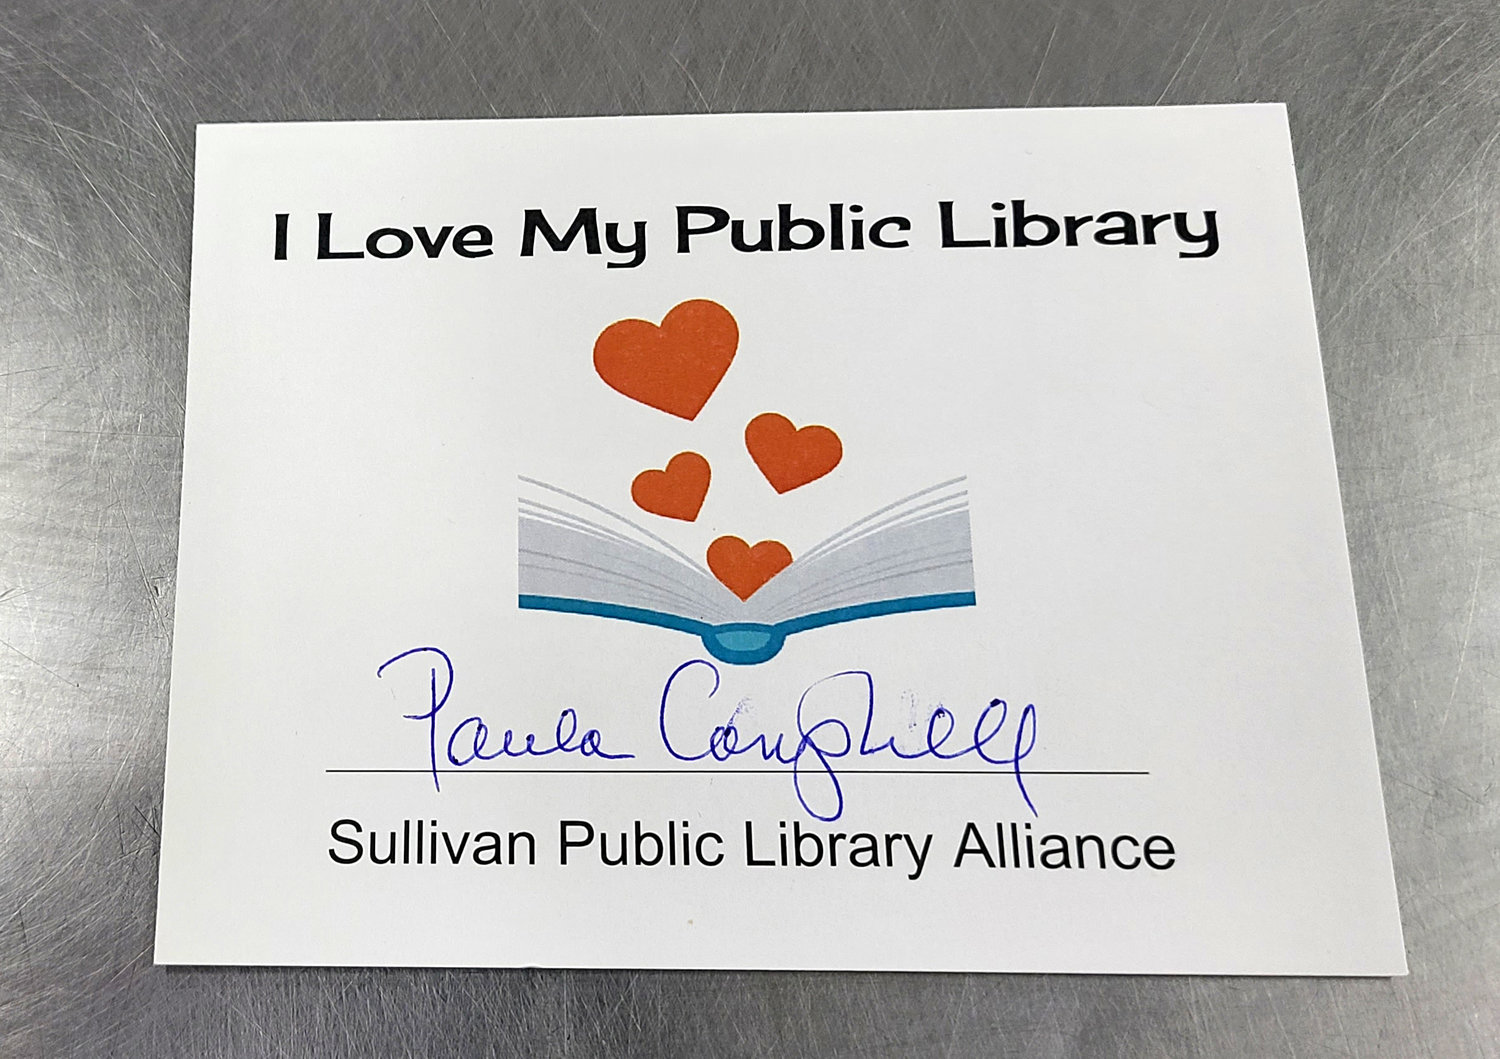 In recognition of National Library Week April 3rd-9th Peck’s Market and the Sullivan County Public Library Alliance are giving shoppers an opportunity to make a donation, in any amount then sign a “I Love My Library” fundraising tag that will be displayed in the local Market. Funds raised will be used by the County’s nine public libraries to underwrite their community programs.